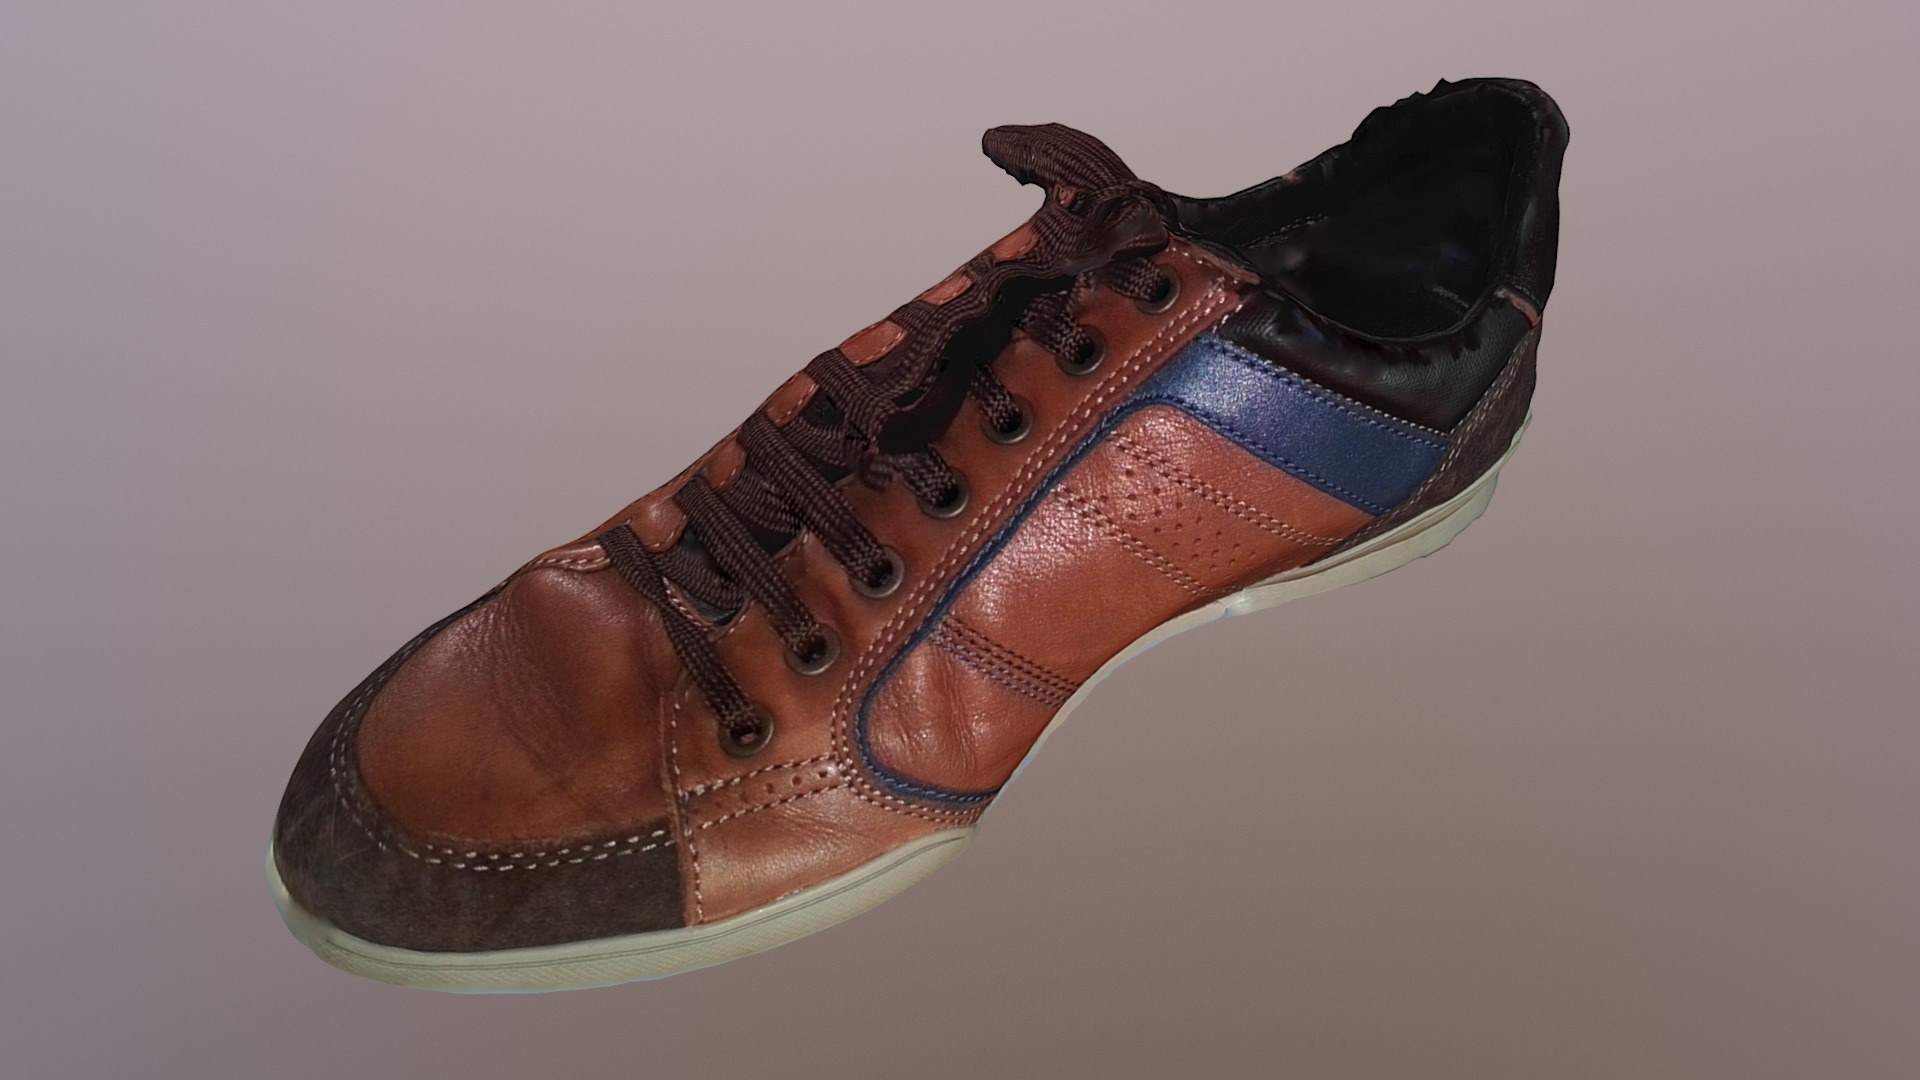 3D model Geox shoe - This is a 3D model of the Geox shoe. The 3D model is about a brown and black shoe.